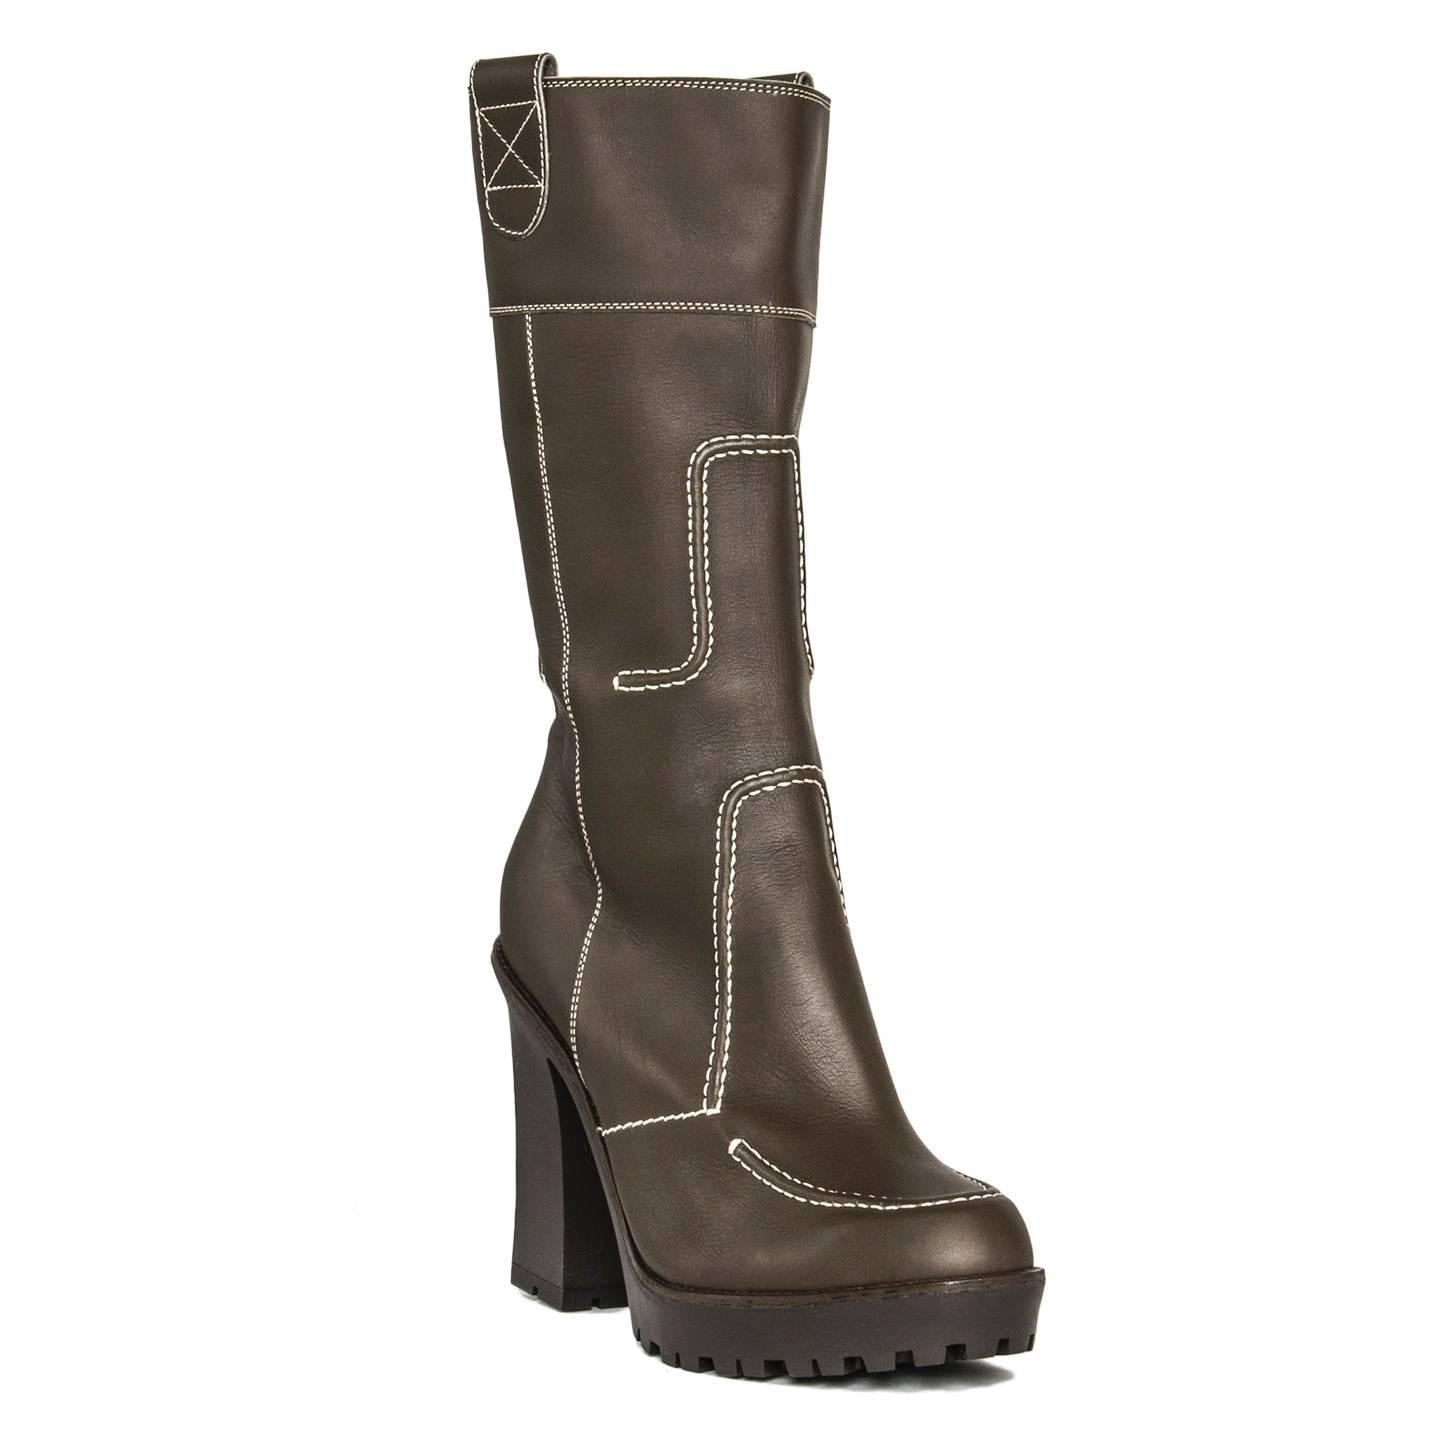 Brown leather calf high boots with platform, chunky heel and rubber sole. They have a narrow fit with a round toe shape and an instep zipper concealed by a leather flap. The main feature of the boots is the white profile stitching and geometric